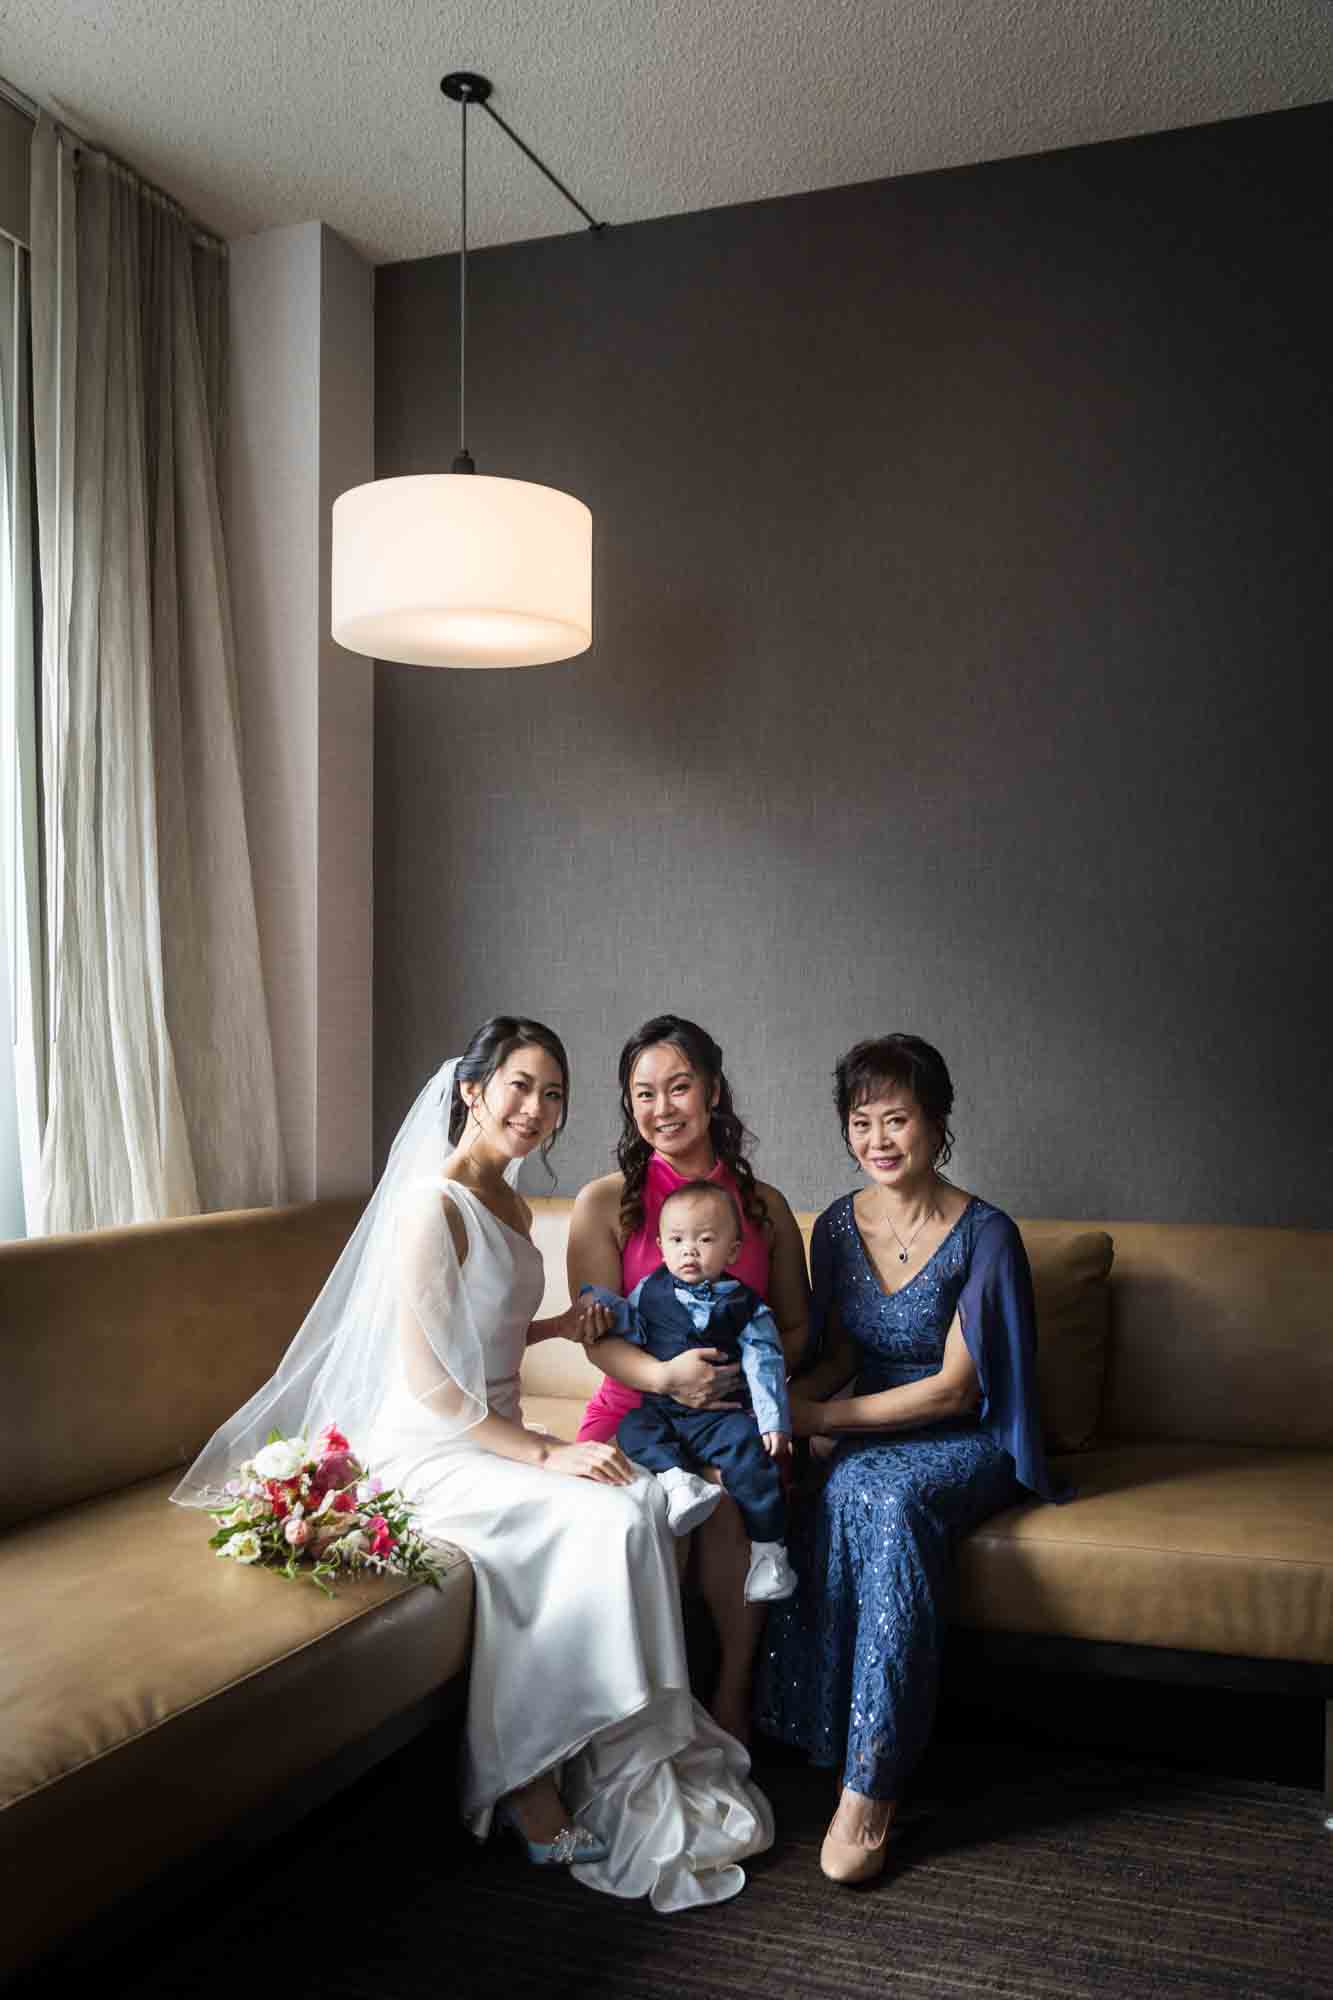 Bride and family sitting on couch